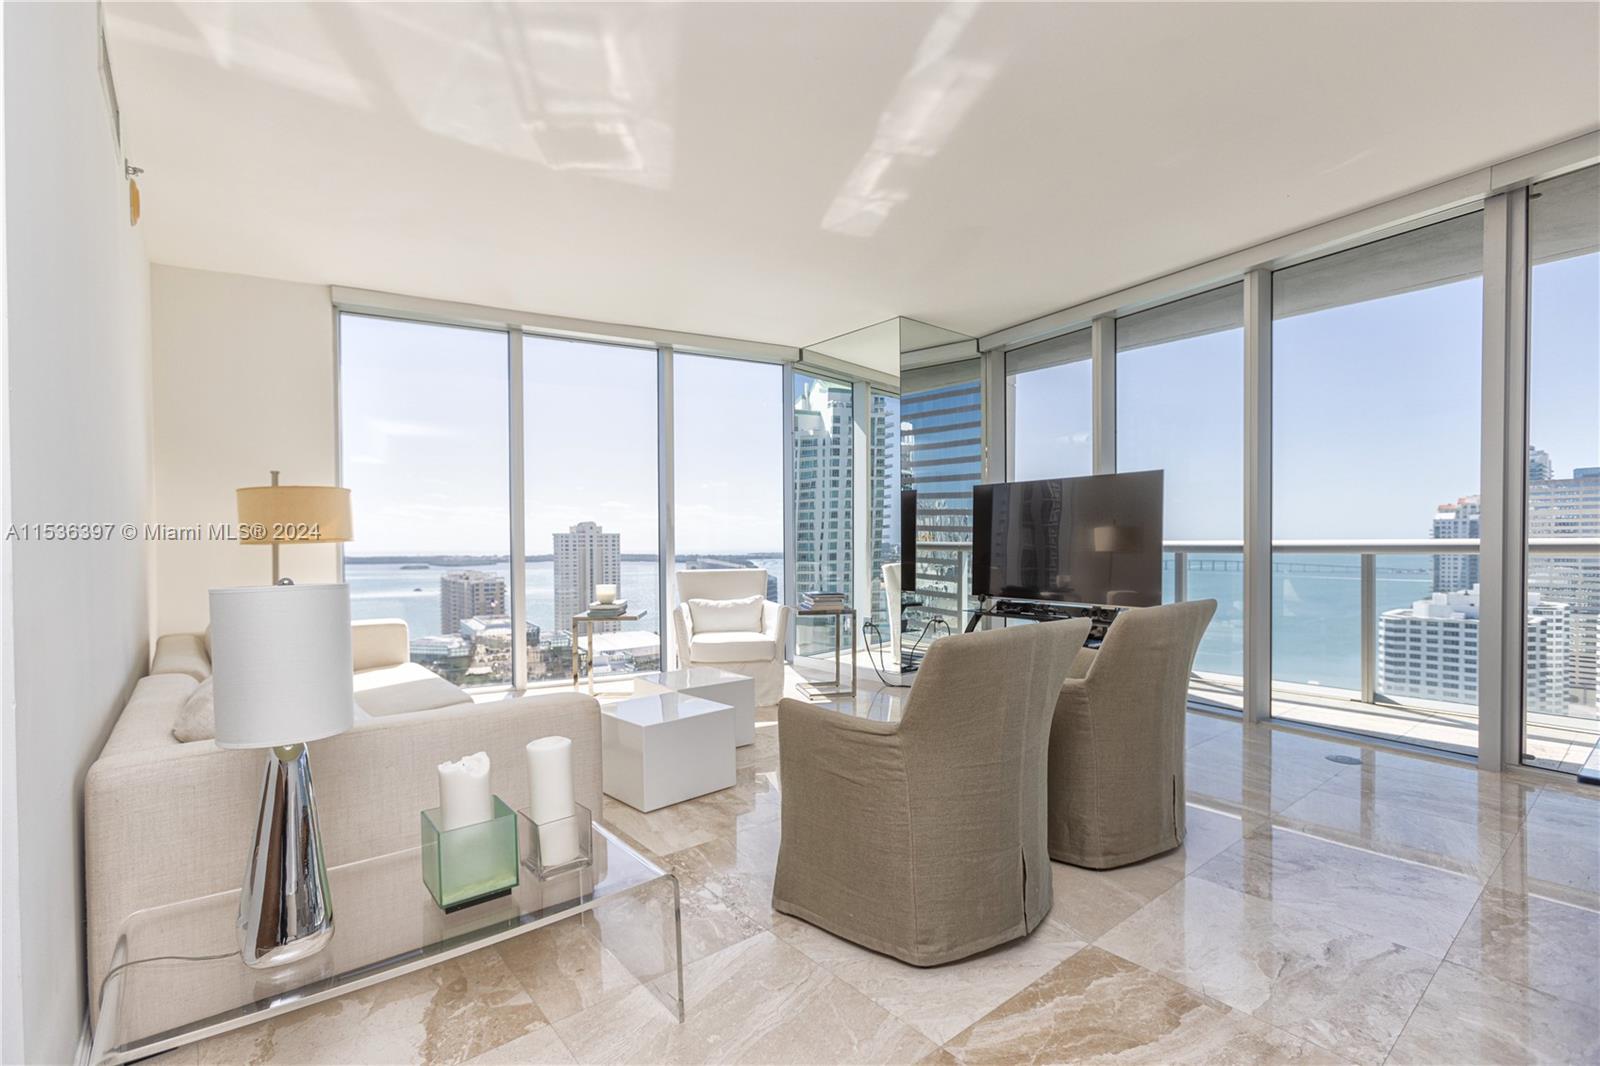 Breathtaking views from this corner unit in Tcon Brickell, located on the 26th floor. Best line The “01”. A spacious Corner 1,870 sqft + large balcony. Breathtaking views of Key Biscayne, Fisher Island, South Pointe, Miami Beach, and more. Unobstructed water views from every room. Icon Brickell is home to the finest amenities Miami has to offer. Designed by the renowned Arquitectonica and interiors inspired by Yoo by Philippe Starck. Top of the line amenities. Including the largest residential pool in Miami, a world class spa with cold pool, steam room, juice bar, state of the art fitness center, valet service, concierge service, secured elevators, 5 star restaurants on the first floor.